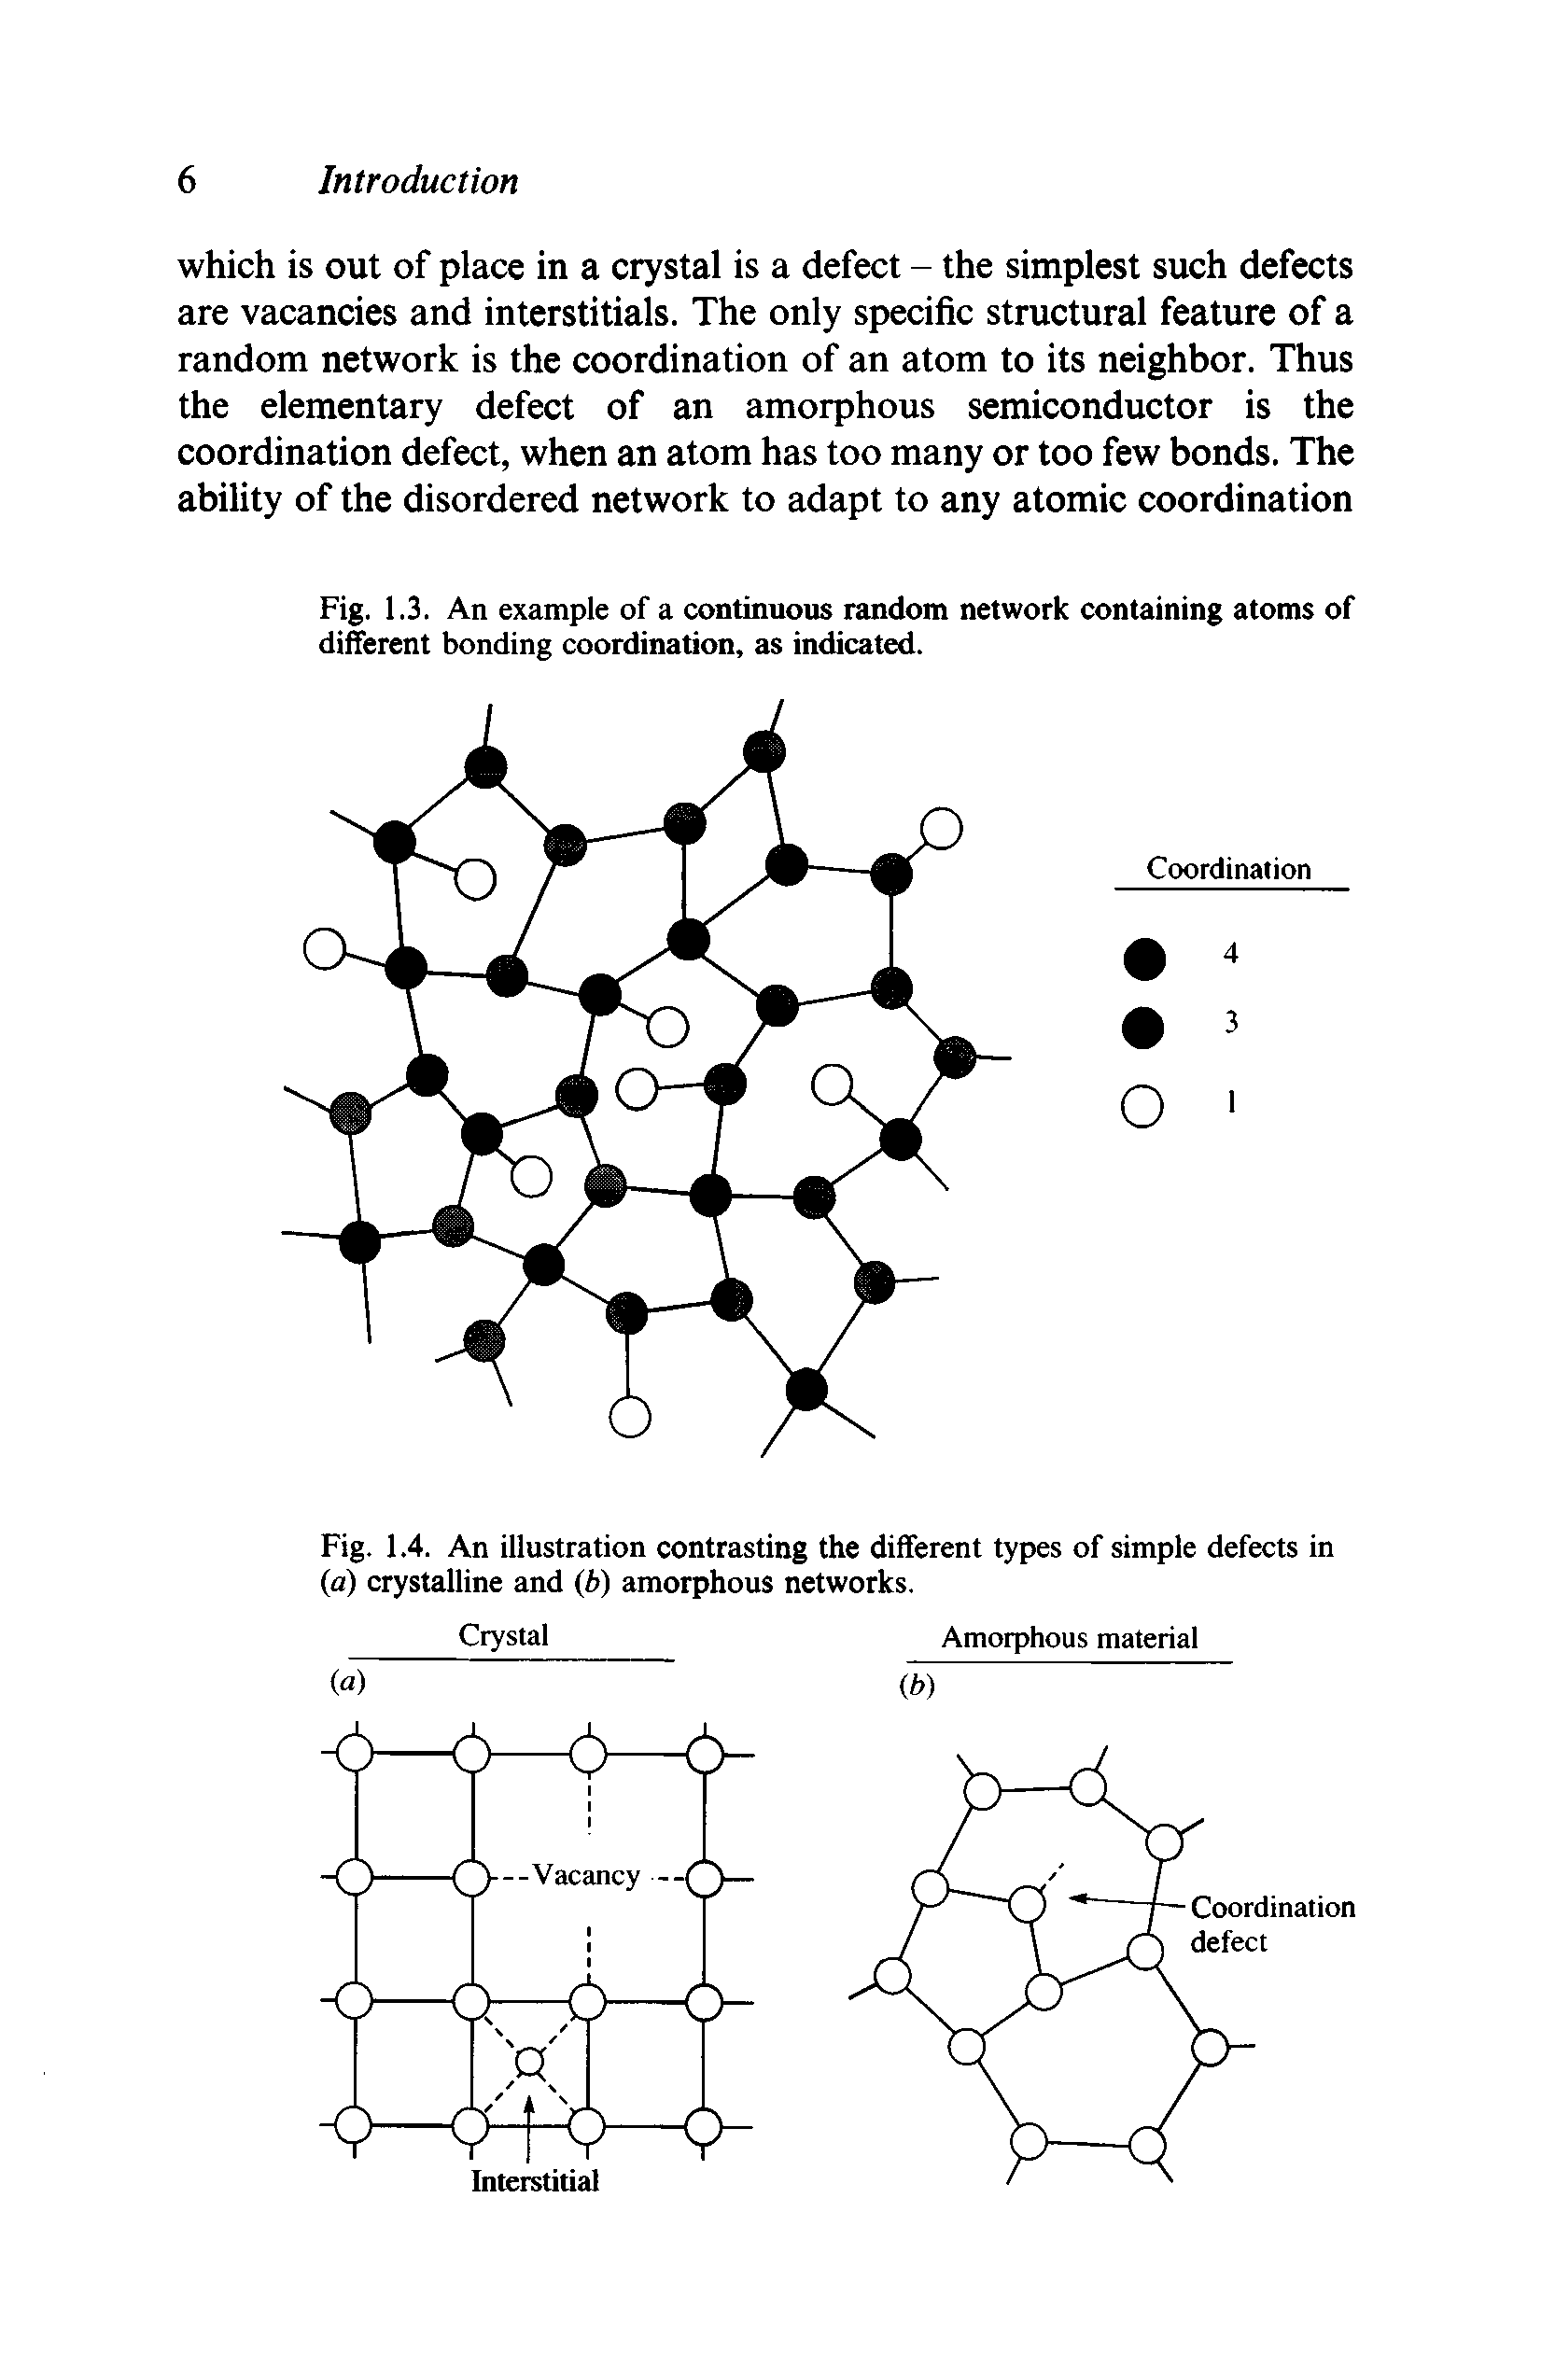 Fig. 1.3. An example of a continuous random network containing atoms of different bonding coordination, as indicated.